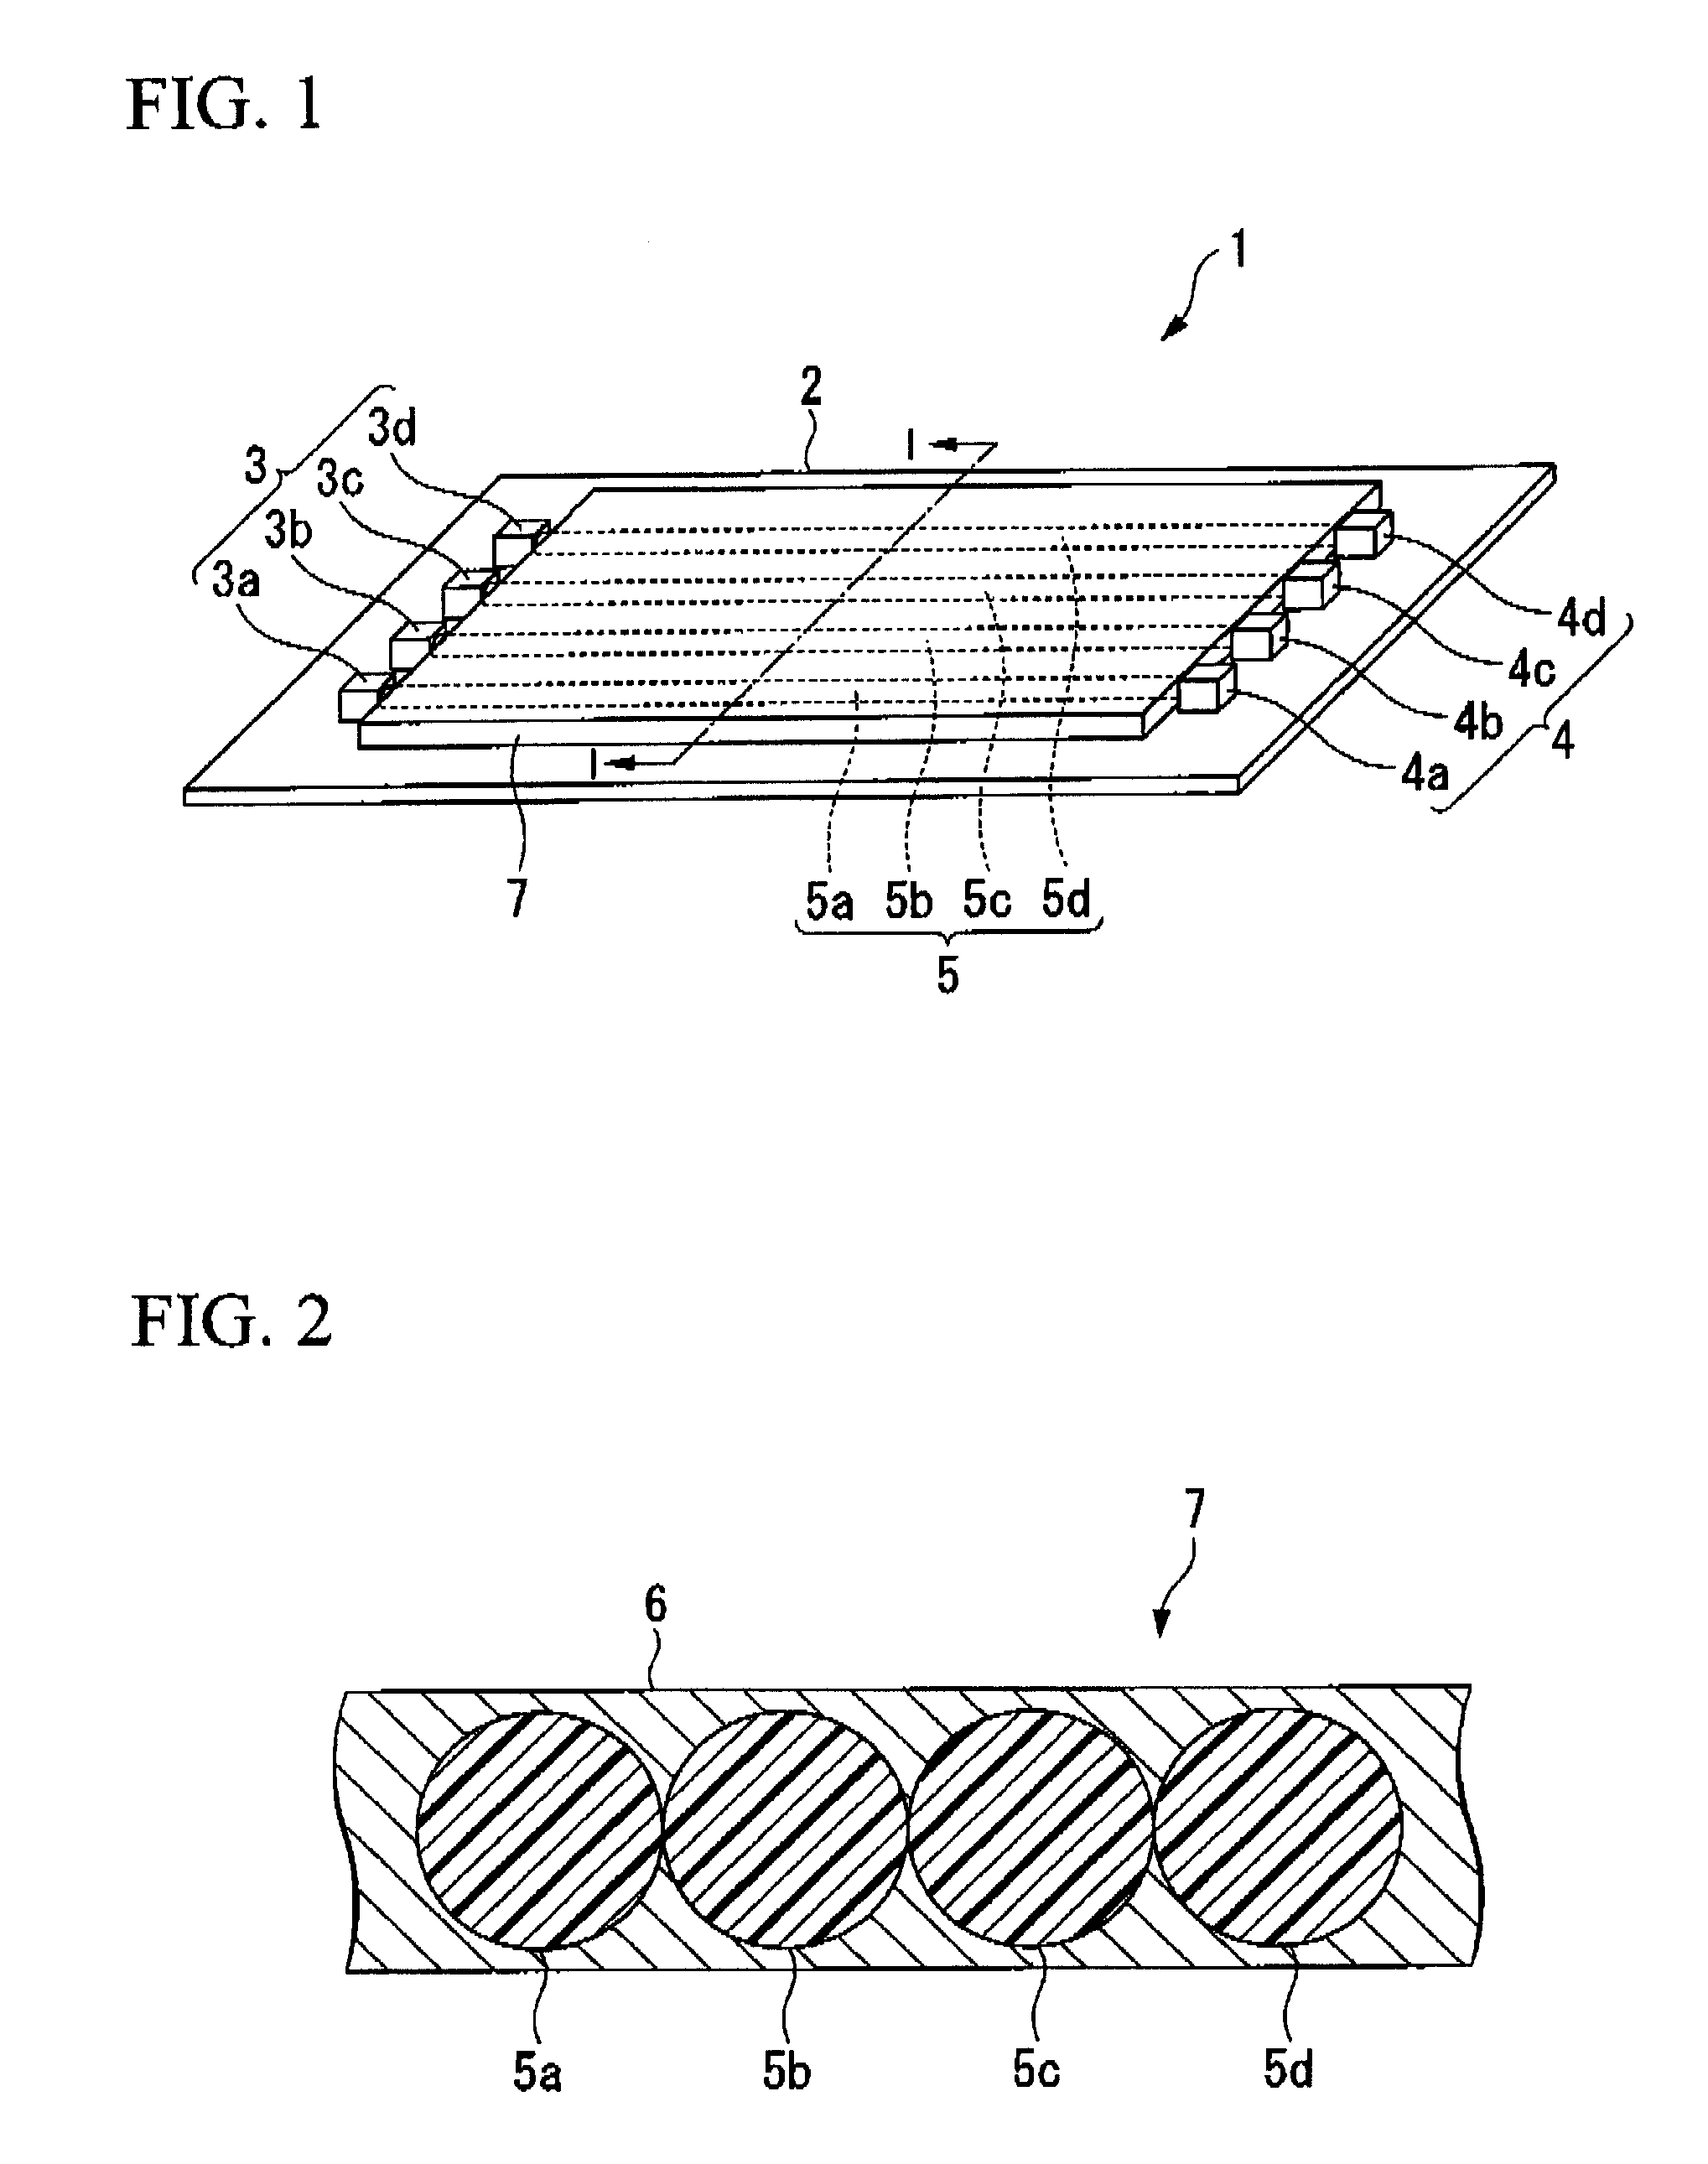 Optical/electrical circuit interconnect board and evaluation method therefor